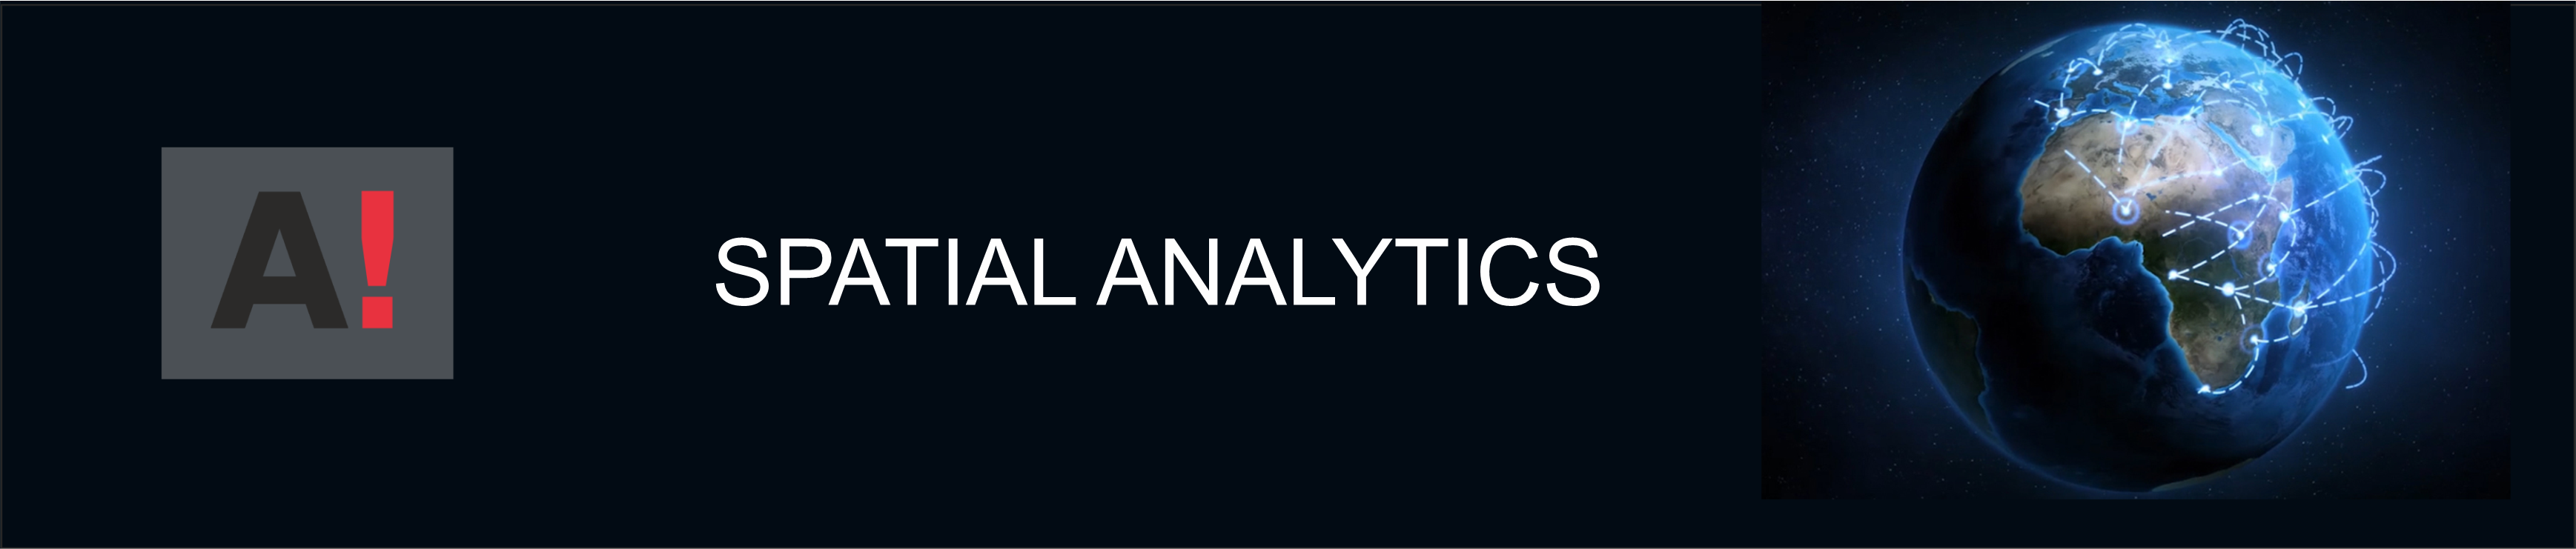 Spatial analytics course